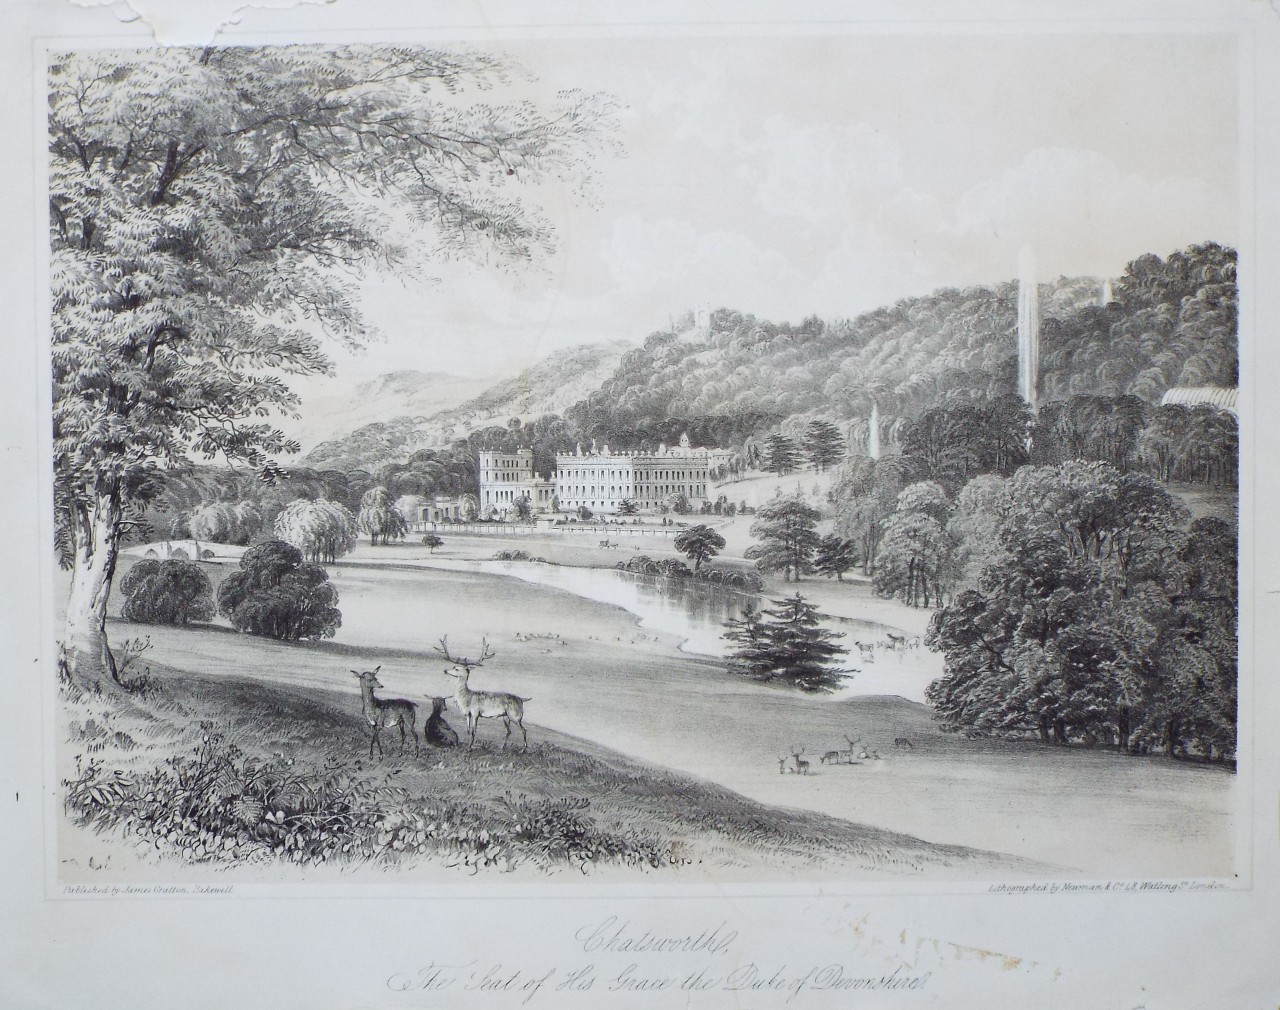 Lithograph - Chatsworth, The Seat of His Grace the Duke of Devonshire. - Newman